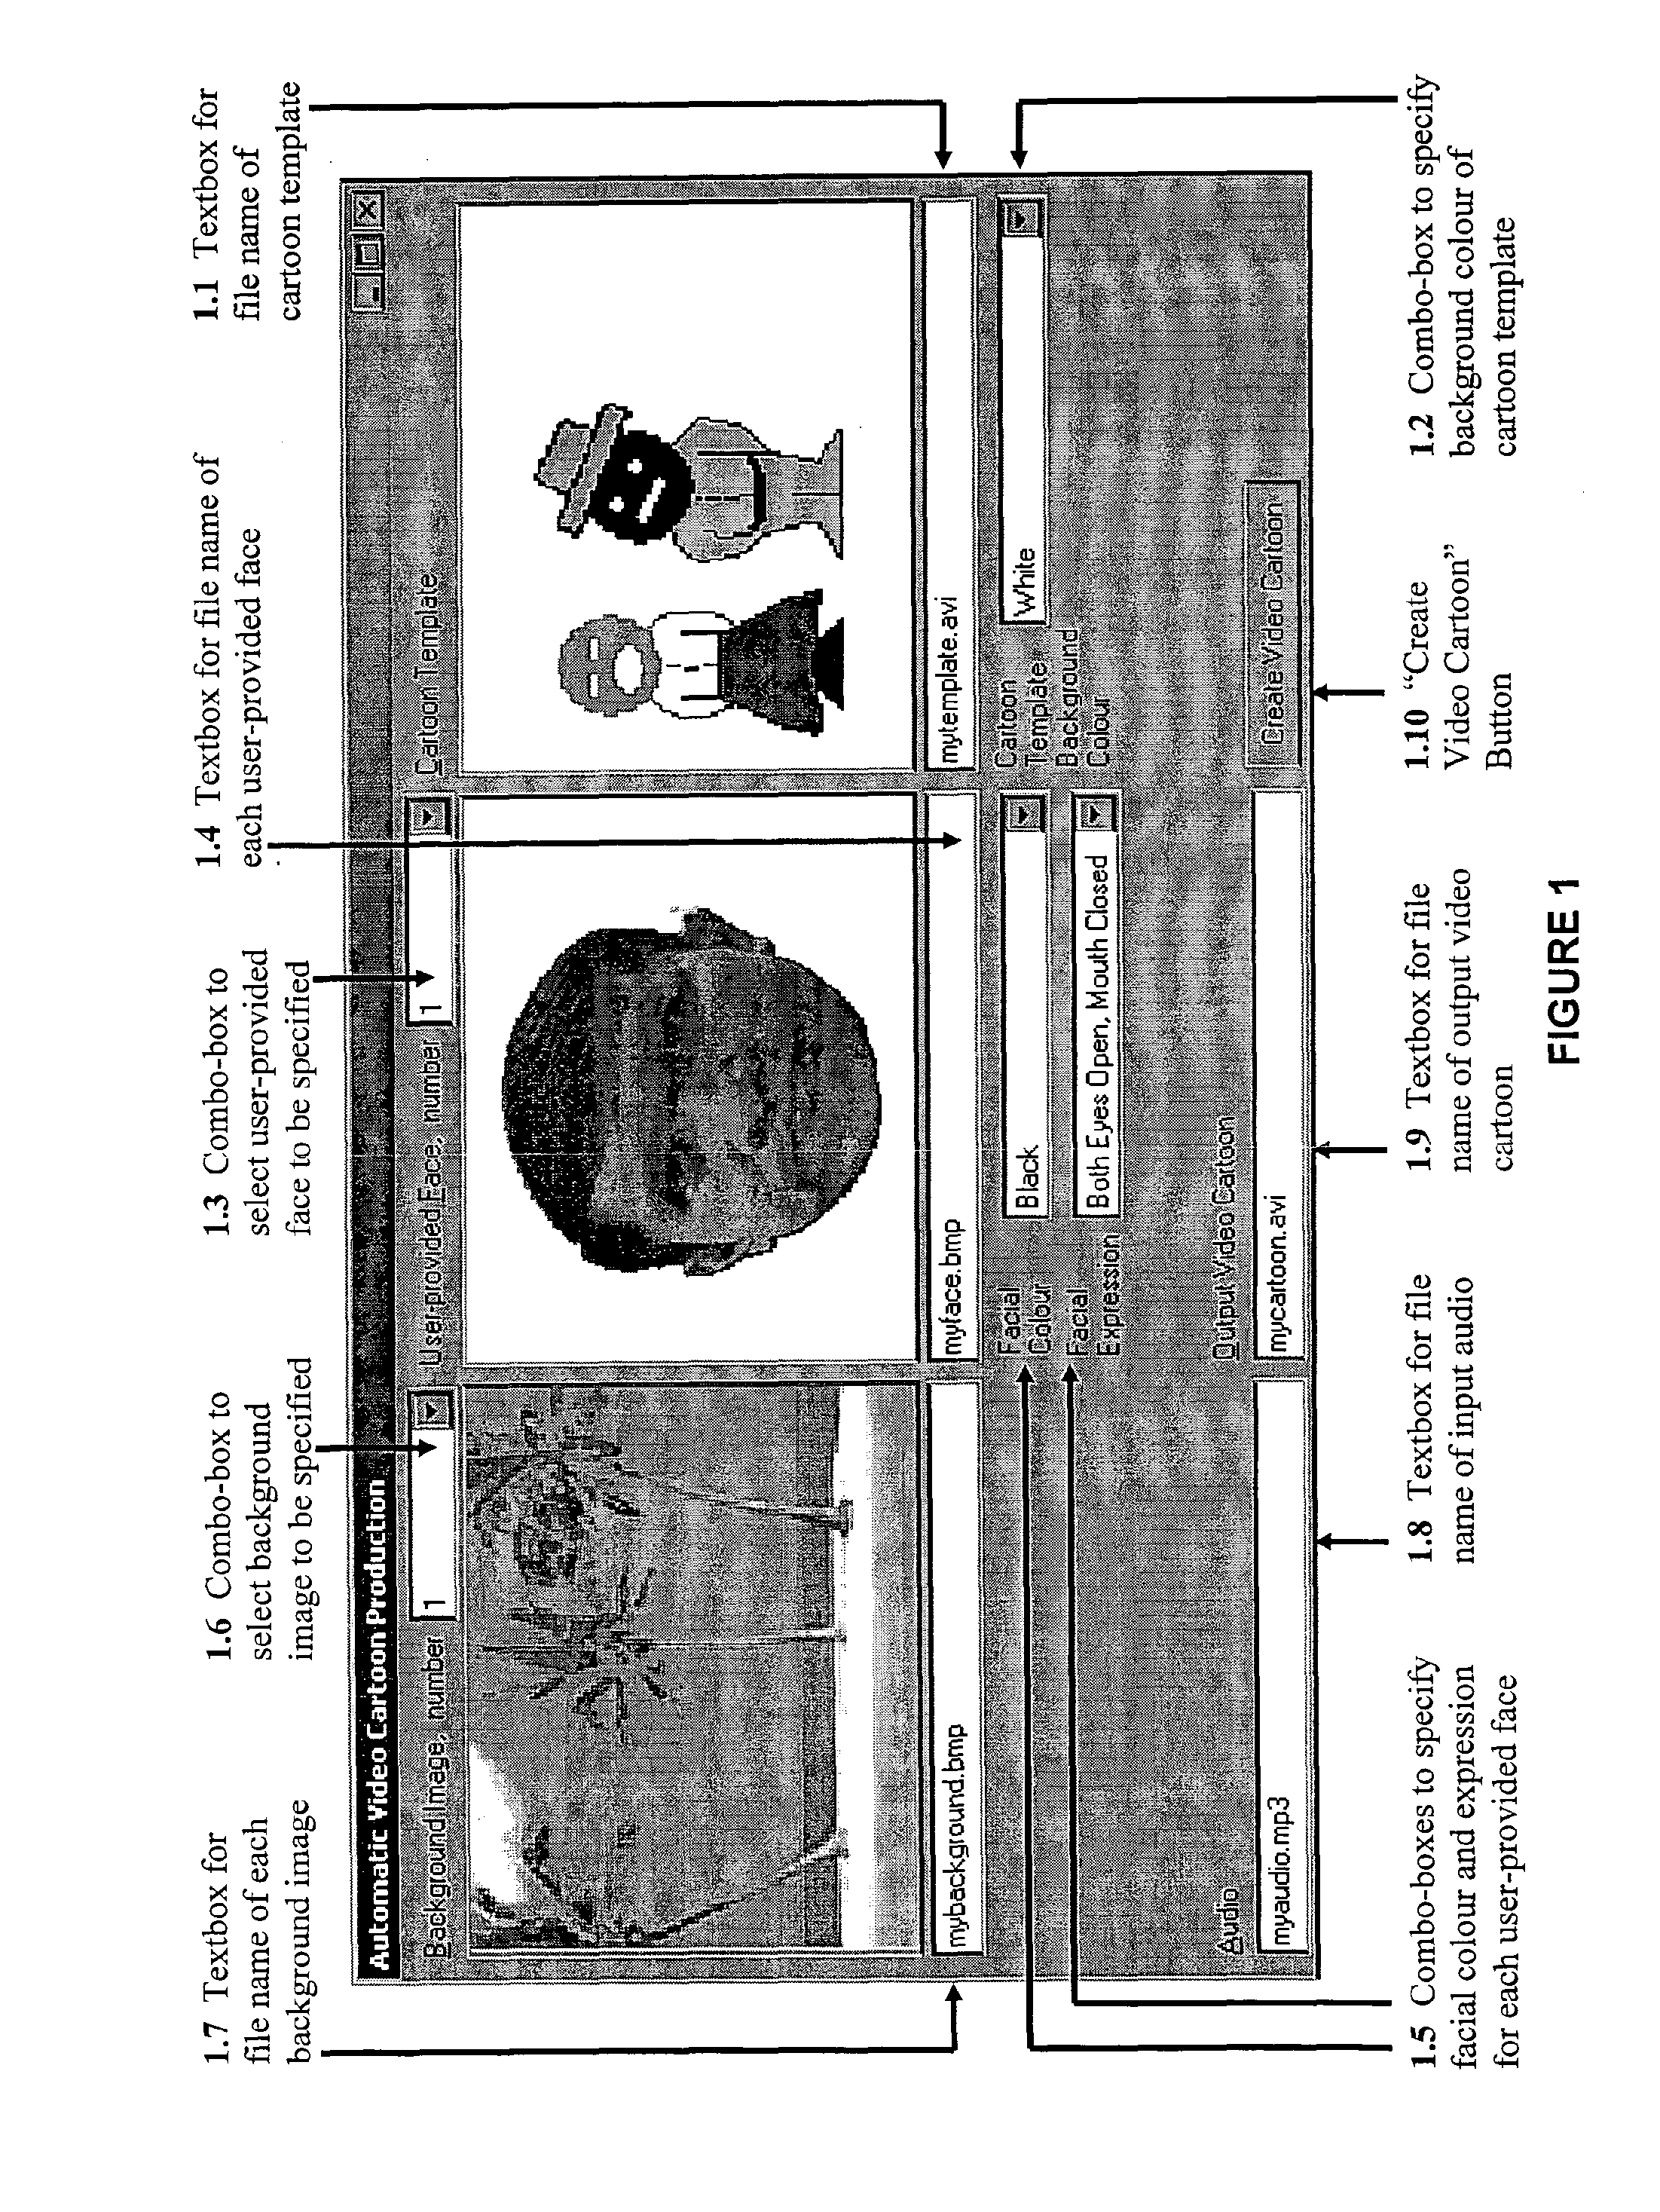 Method for automatically producing video cartoon with superimposed faces from cartoon template